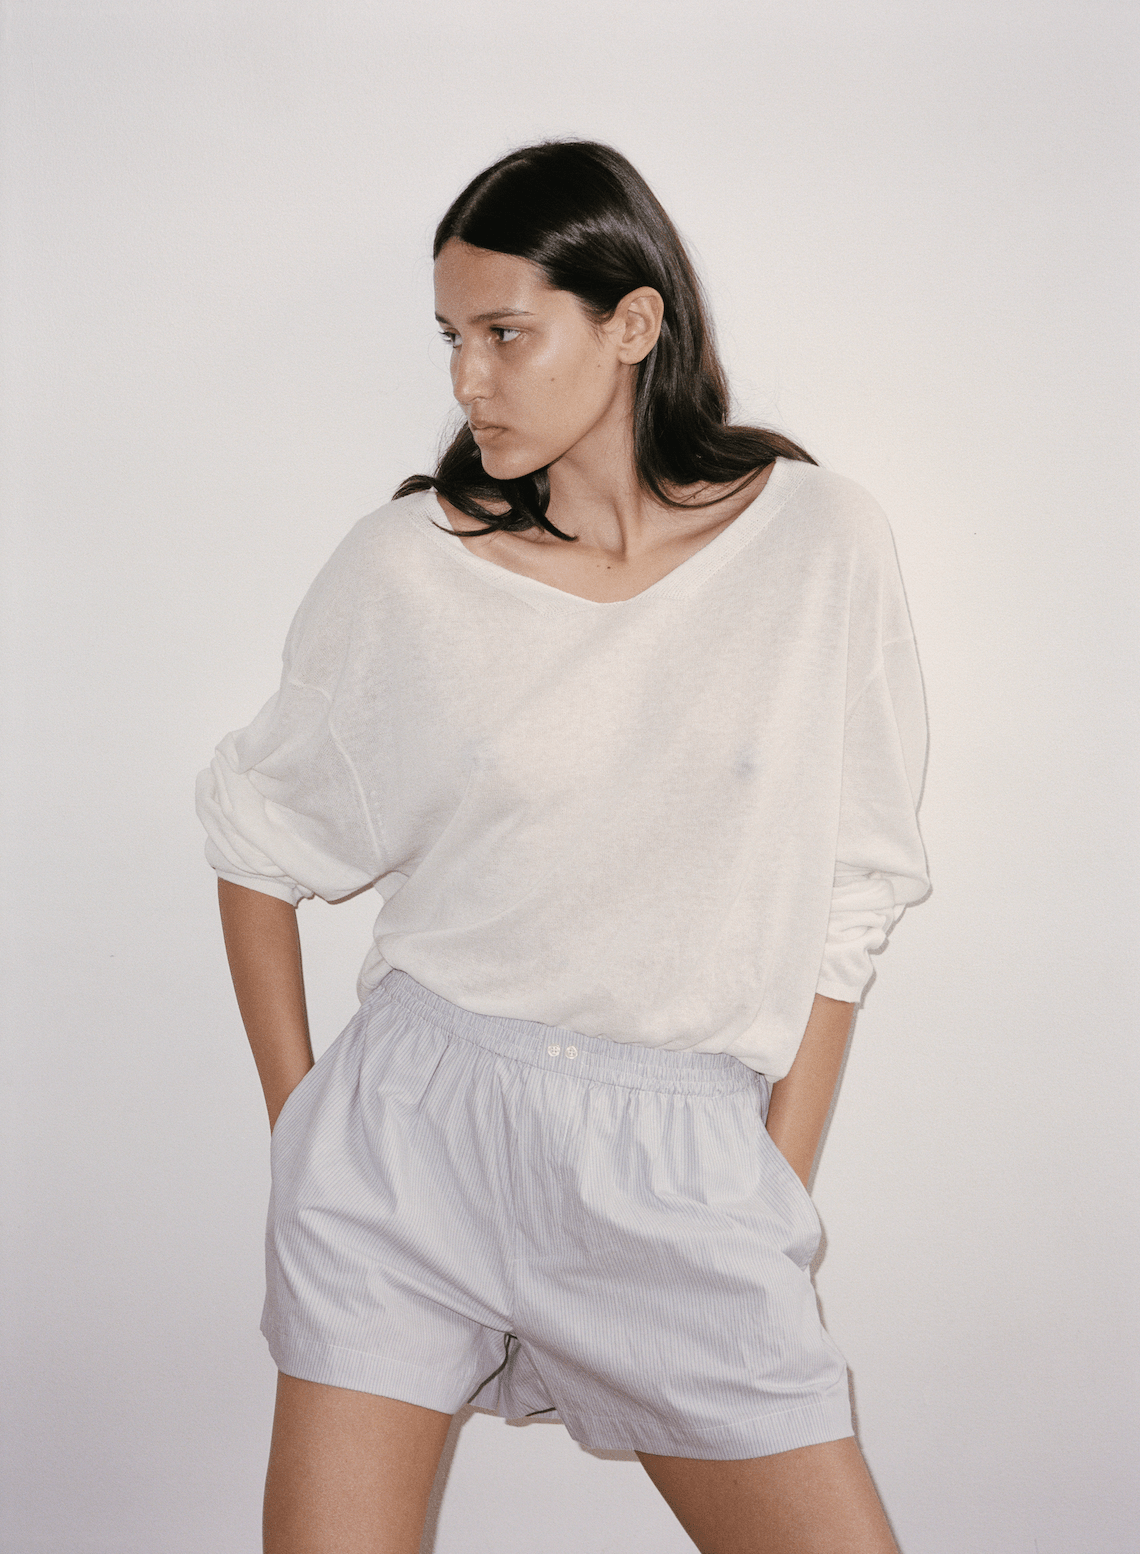 Film image of female model leaning against wall wearing the Loose Long Sleeve Knitted Top by Deiji Studios in white, paired with the Boxer in Dream Stripe.